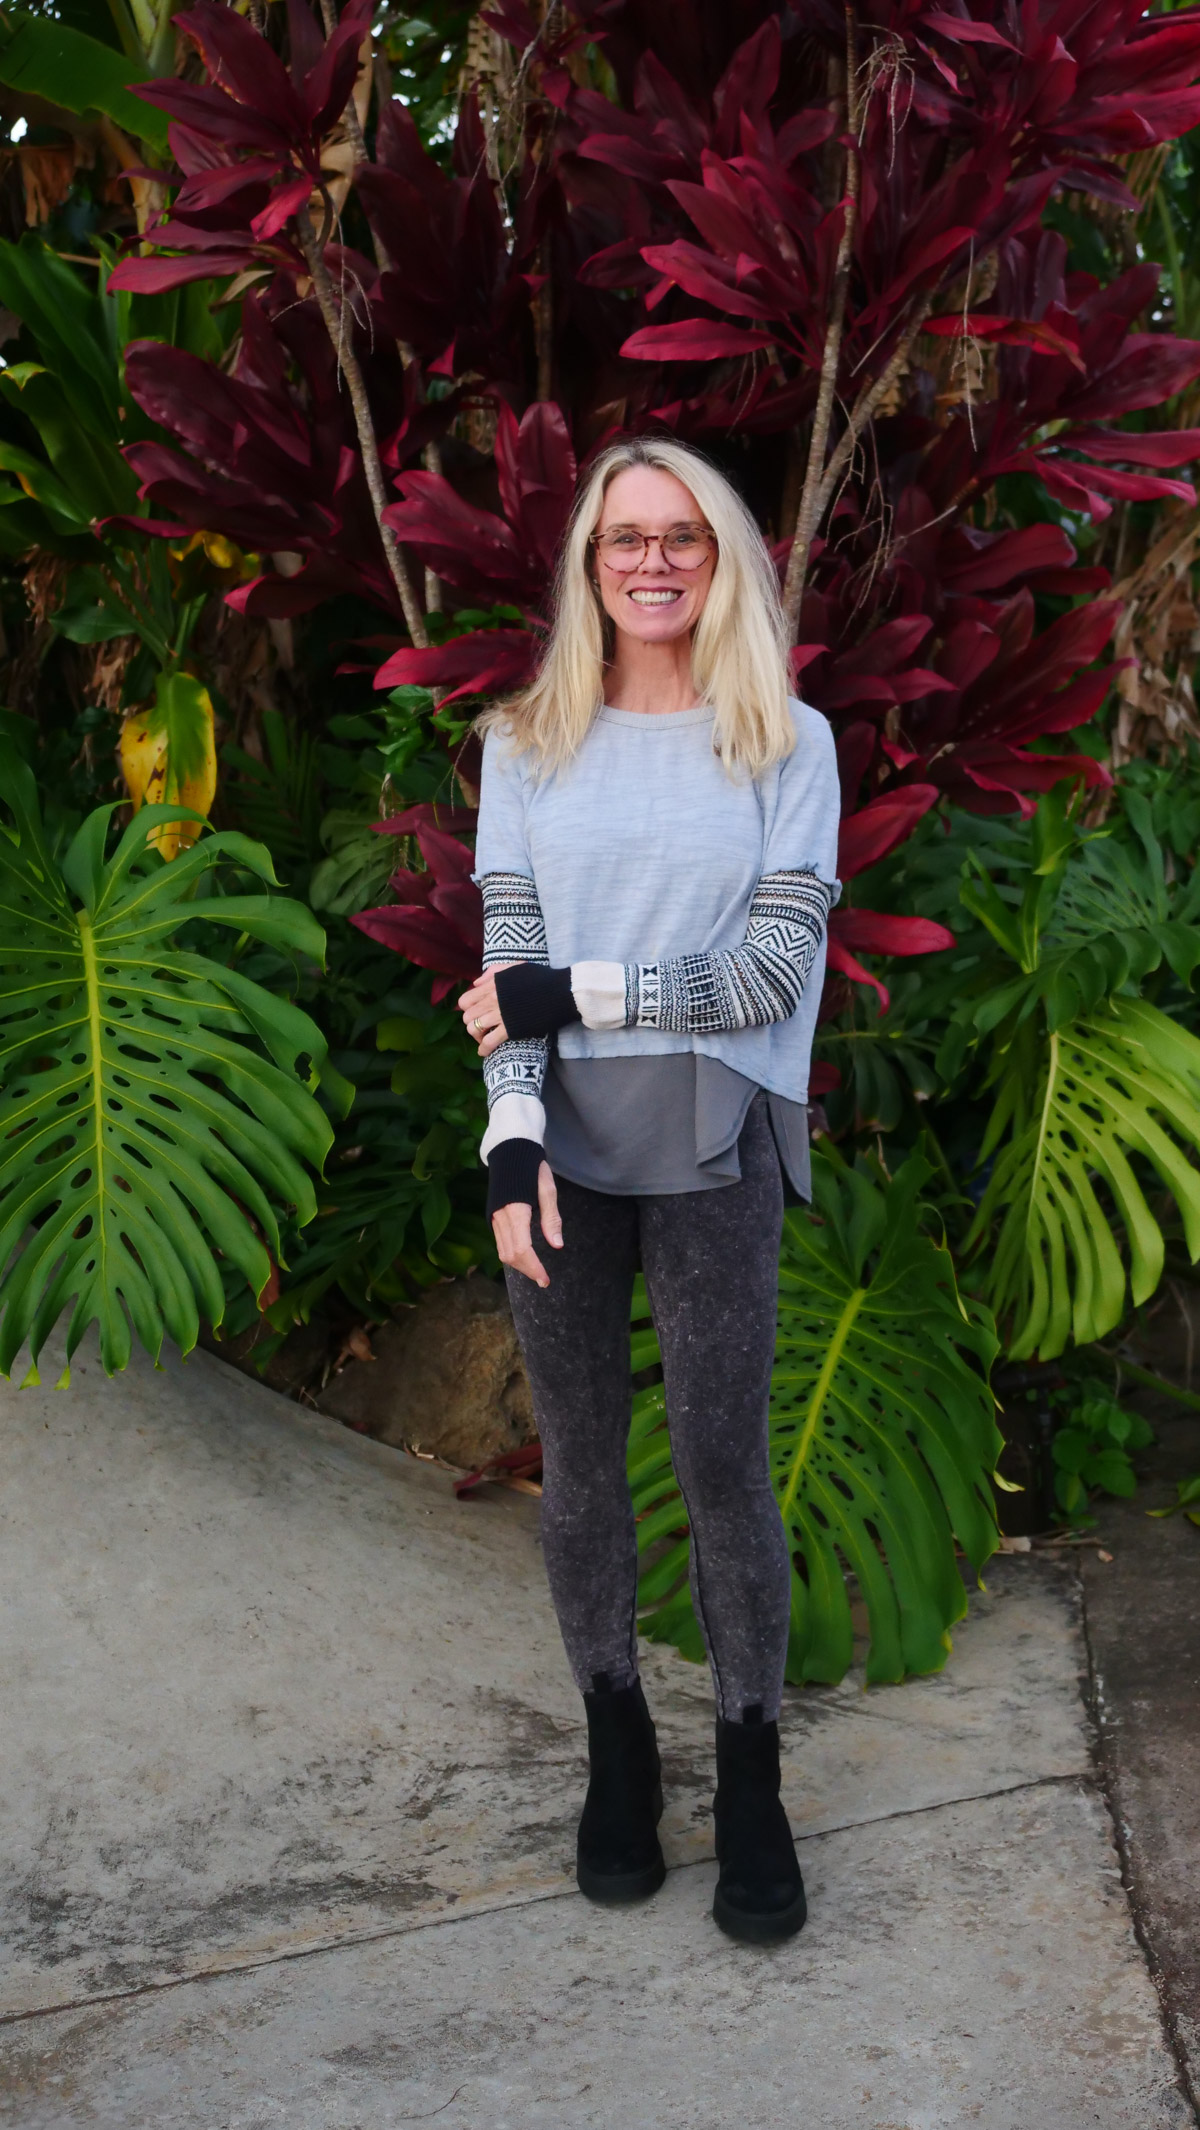 Fall Fashion (in my 50’s 😉) – with a Free People Giveaway!